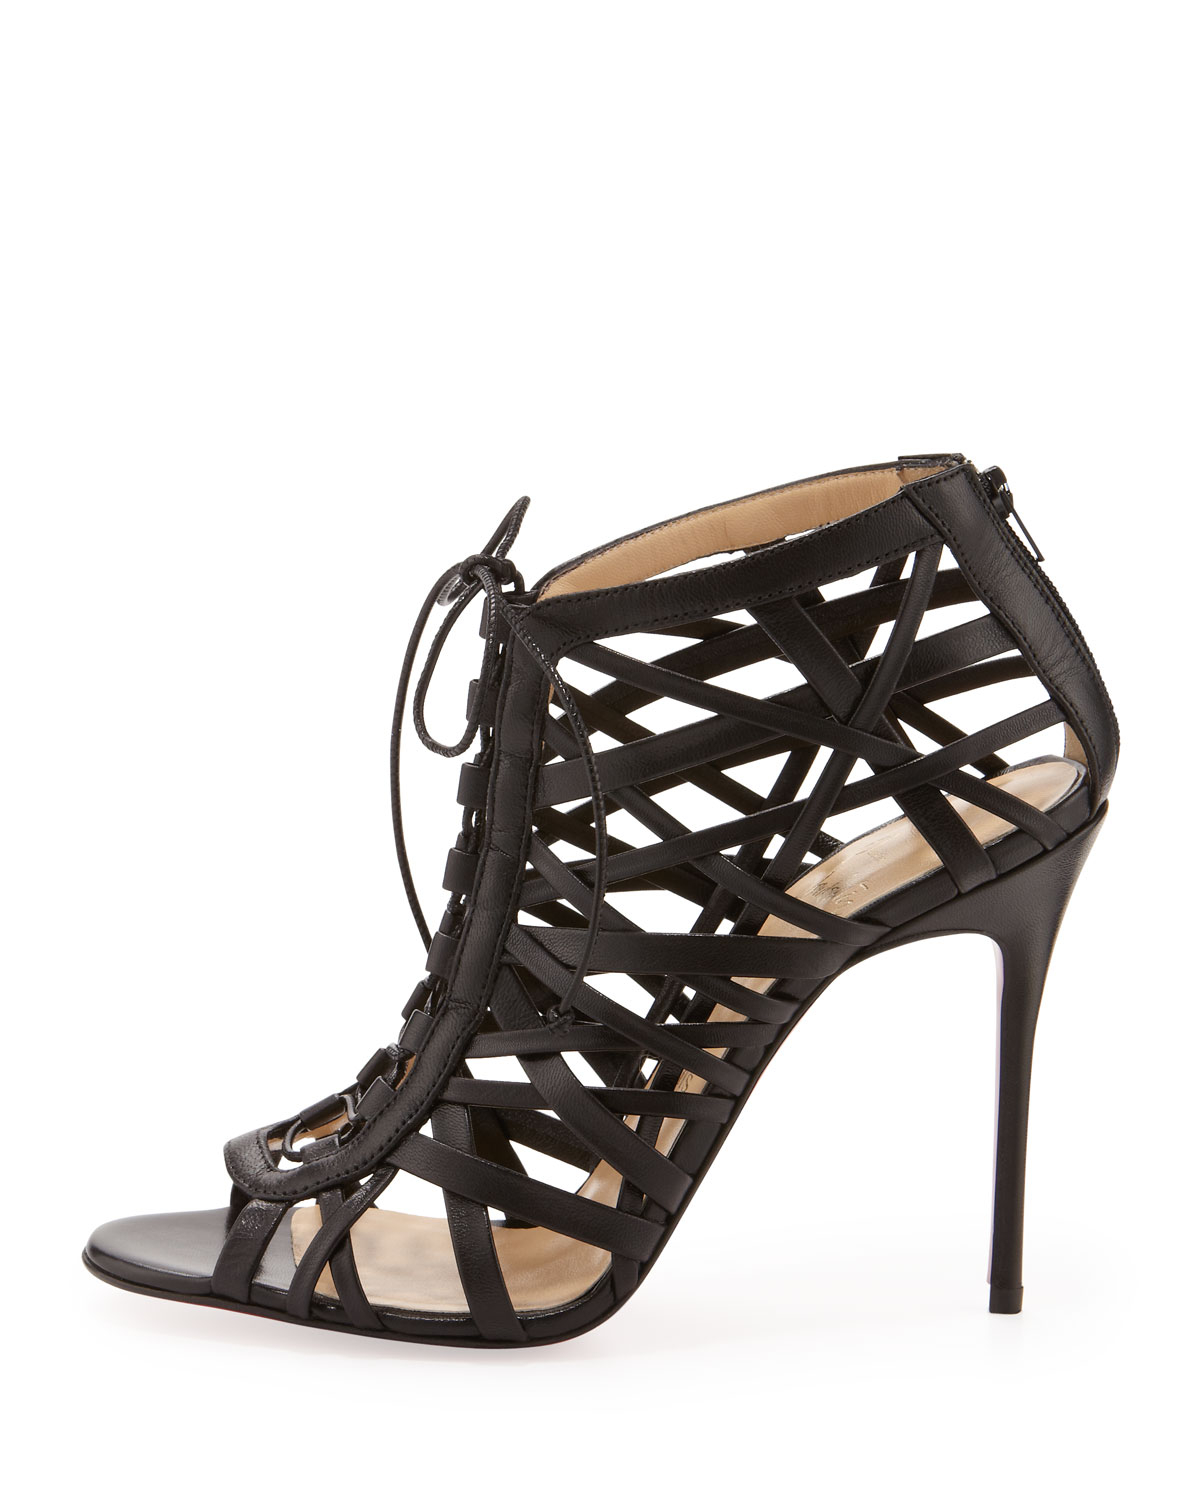 christian louboutin leather gladiator sandals Black lace-up front ...